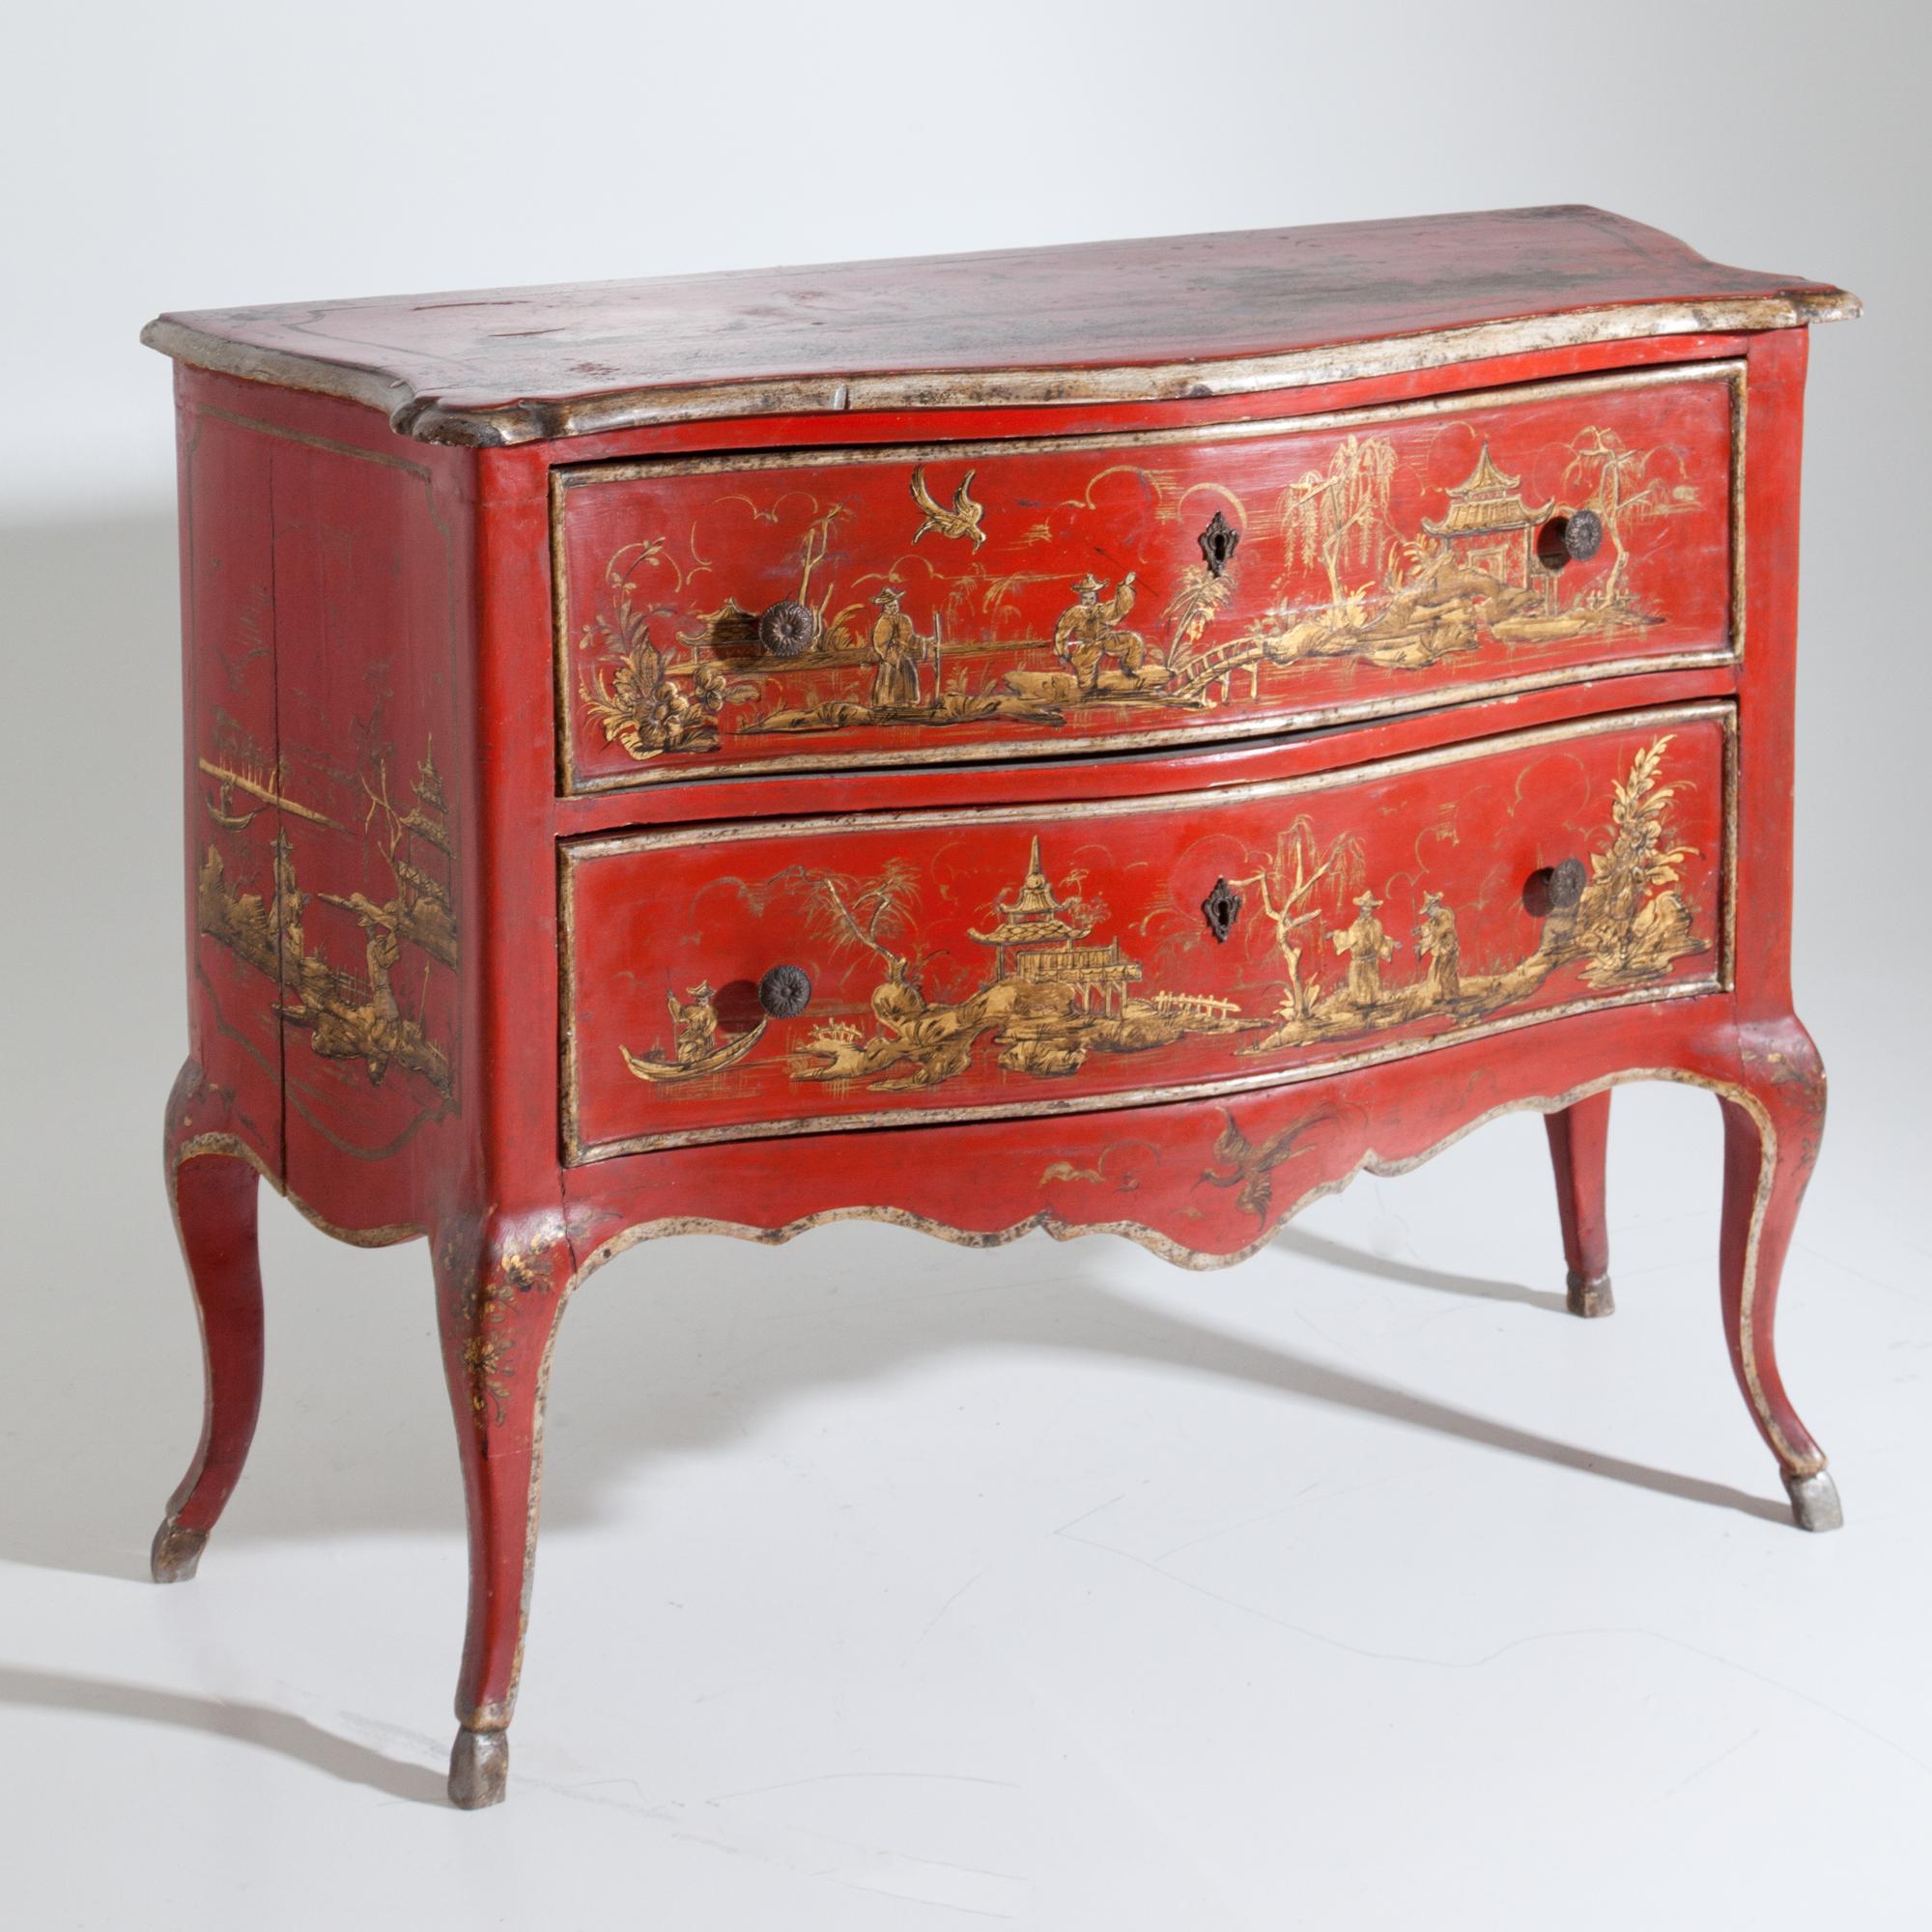 Two-drawered red lacquered chest of drawers in Louis Quinze style. The chest is slightly bellied and stands on s-shaped legs, the frame is also curved. The sides, shelf and fronts of the drawers are decorated with chinoiserie decors.